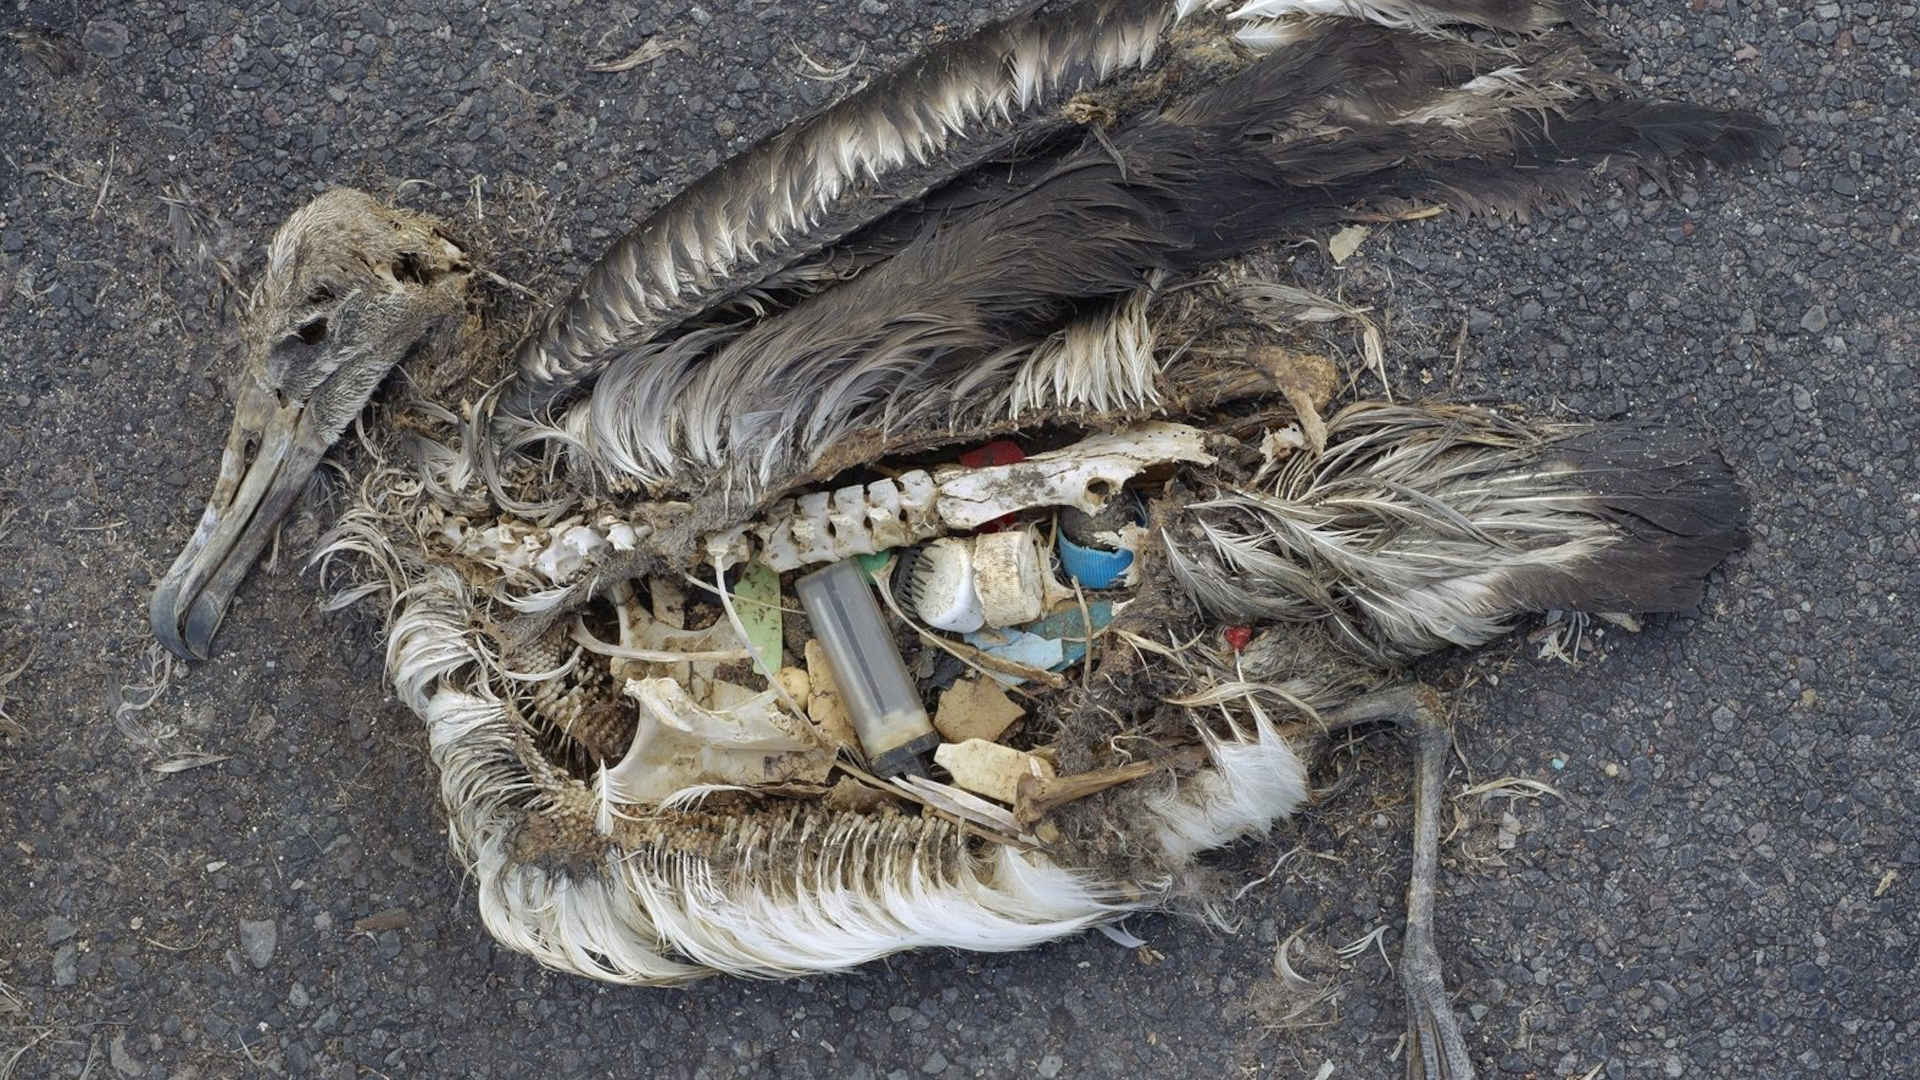 The unaltered stomach contents of a dead albatross on Midway Atoll National Wildlife Refuge in September 2009.